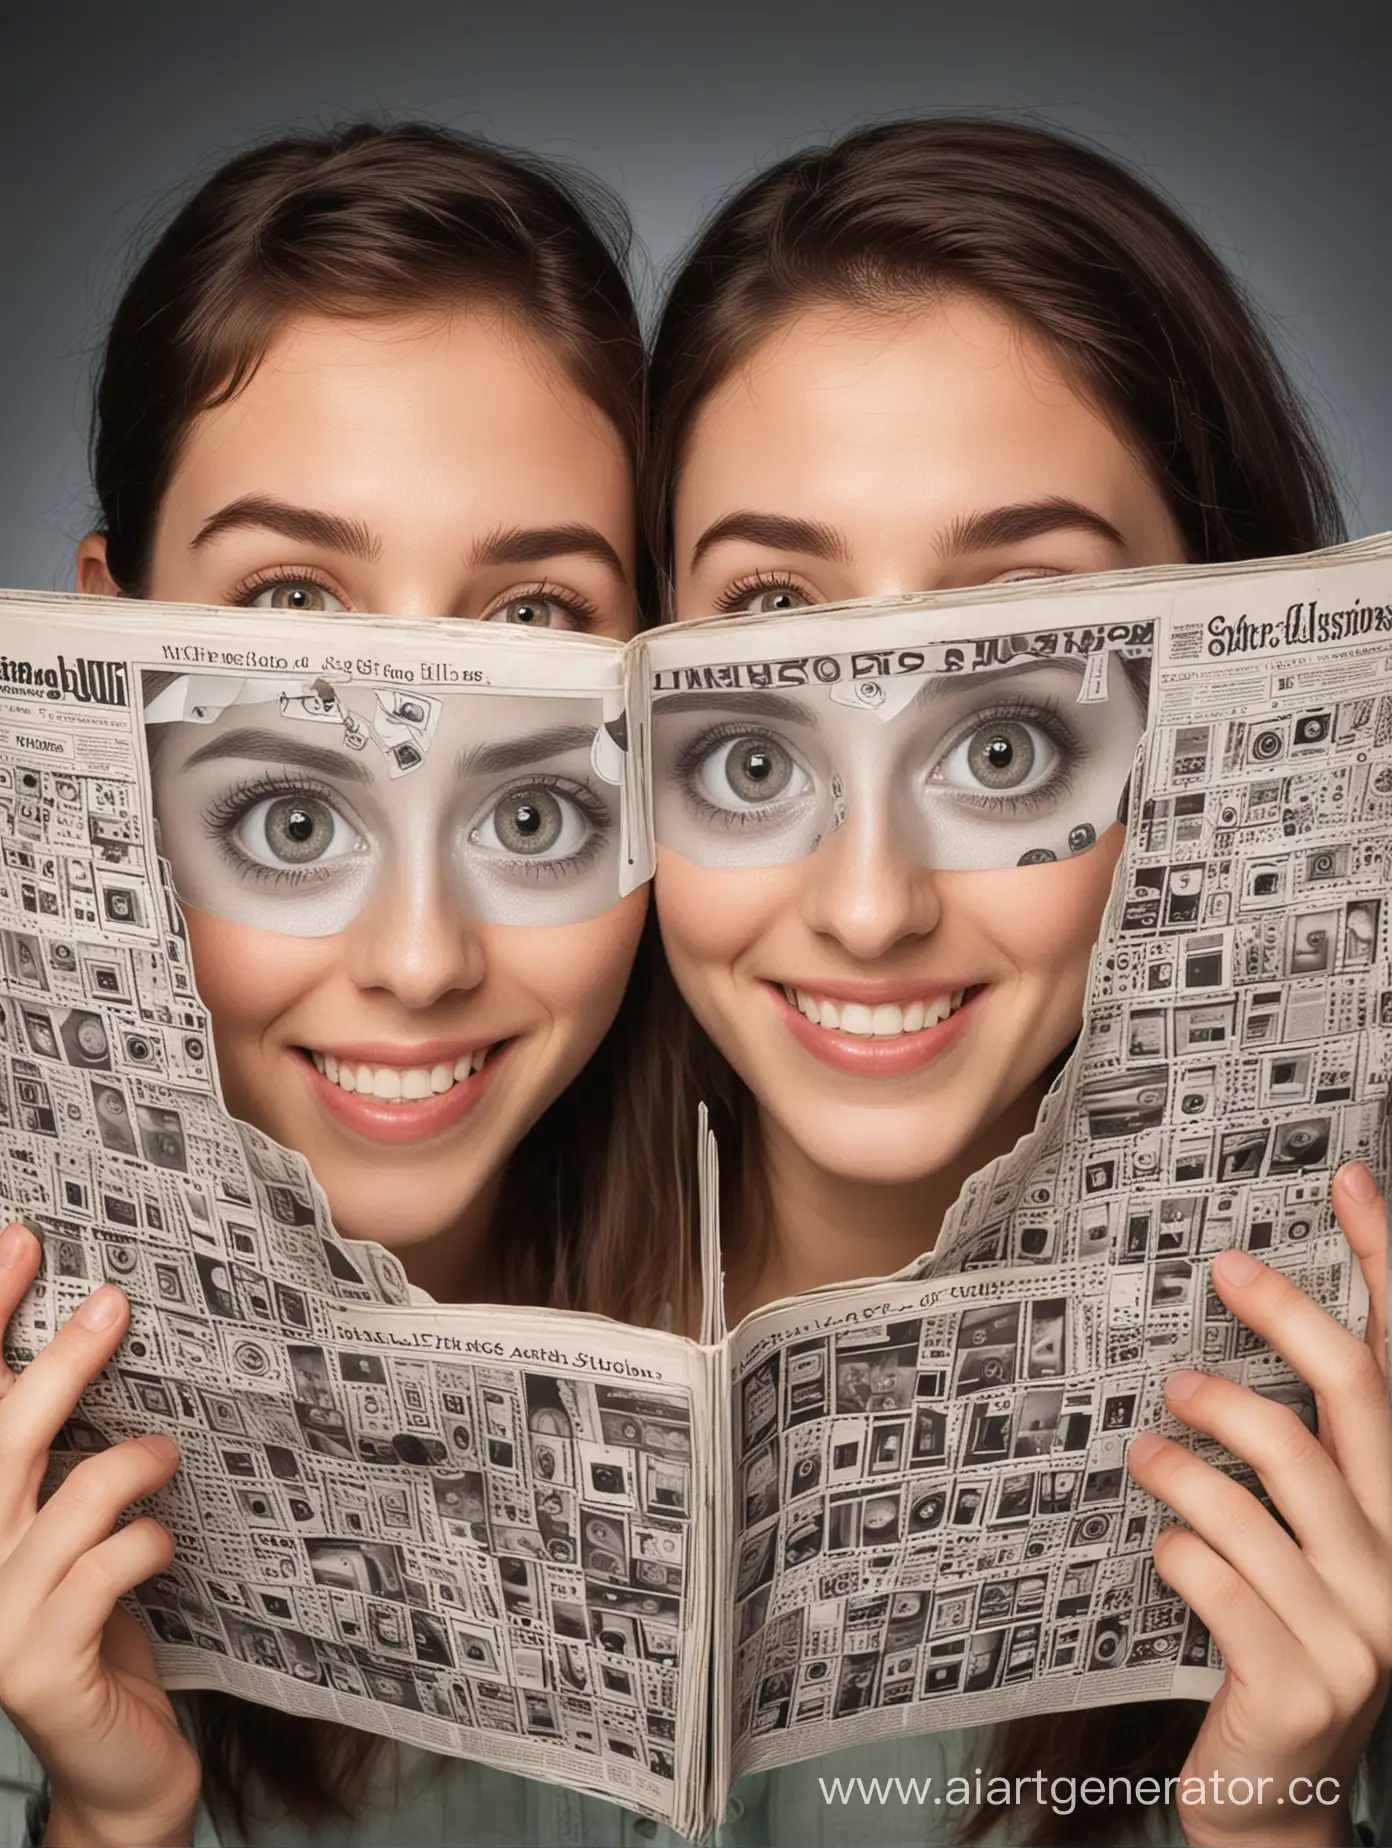 two people with big eyes and smile look at Half-opened magazine with stereo images of optical illusions